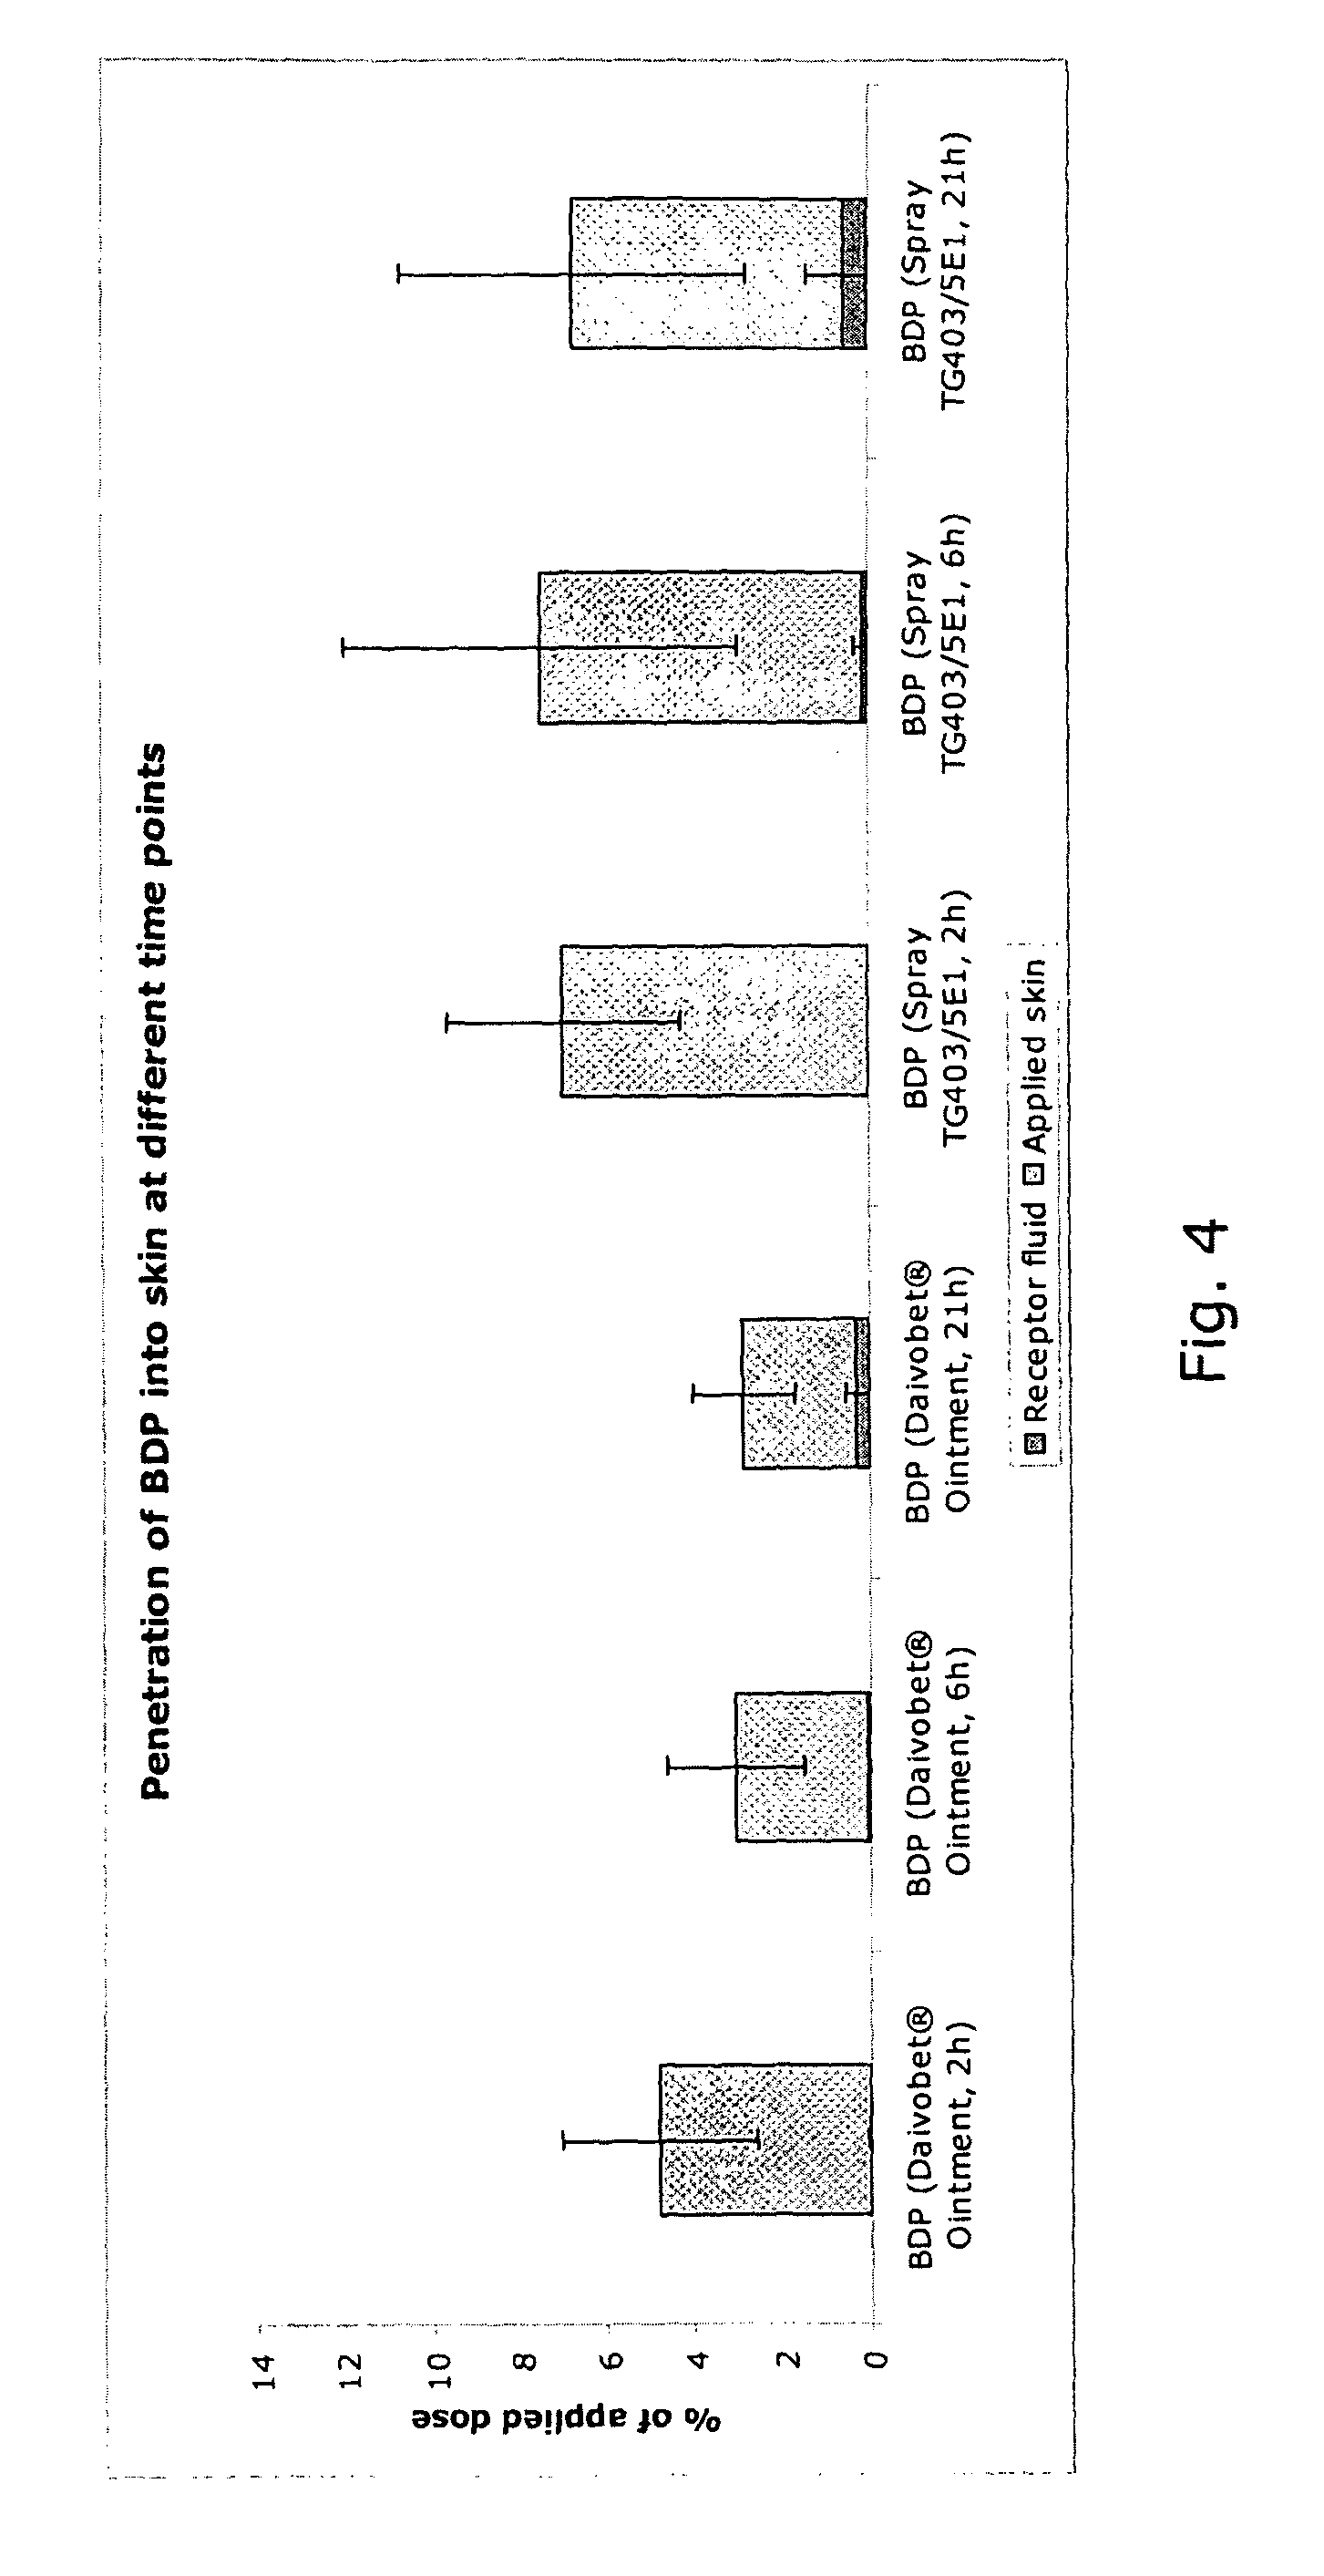 Pharmaceutical spray composition comprising a vitamin D analogue and a corticosteroid